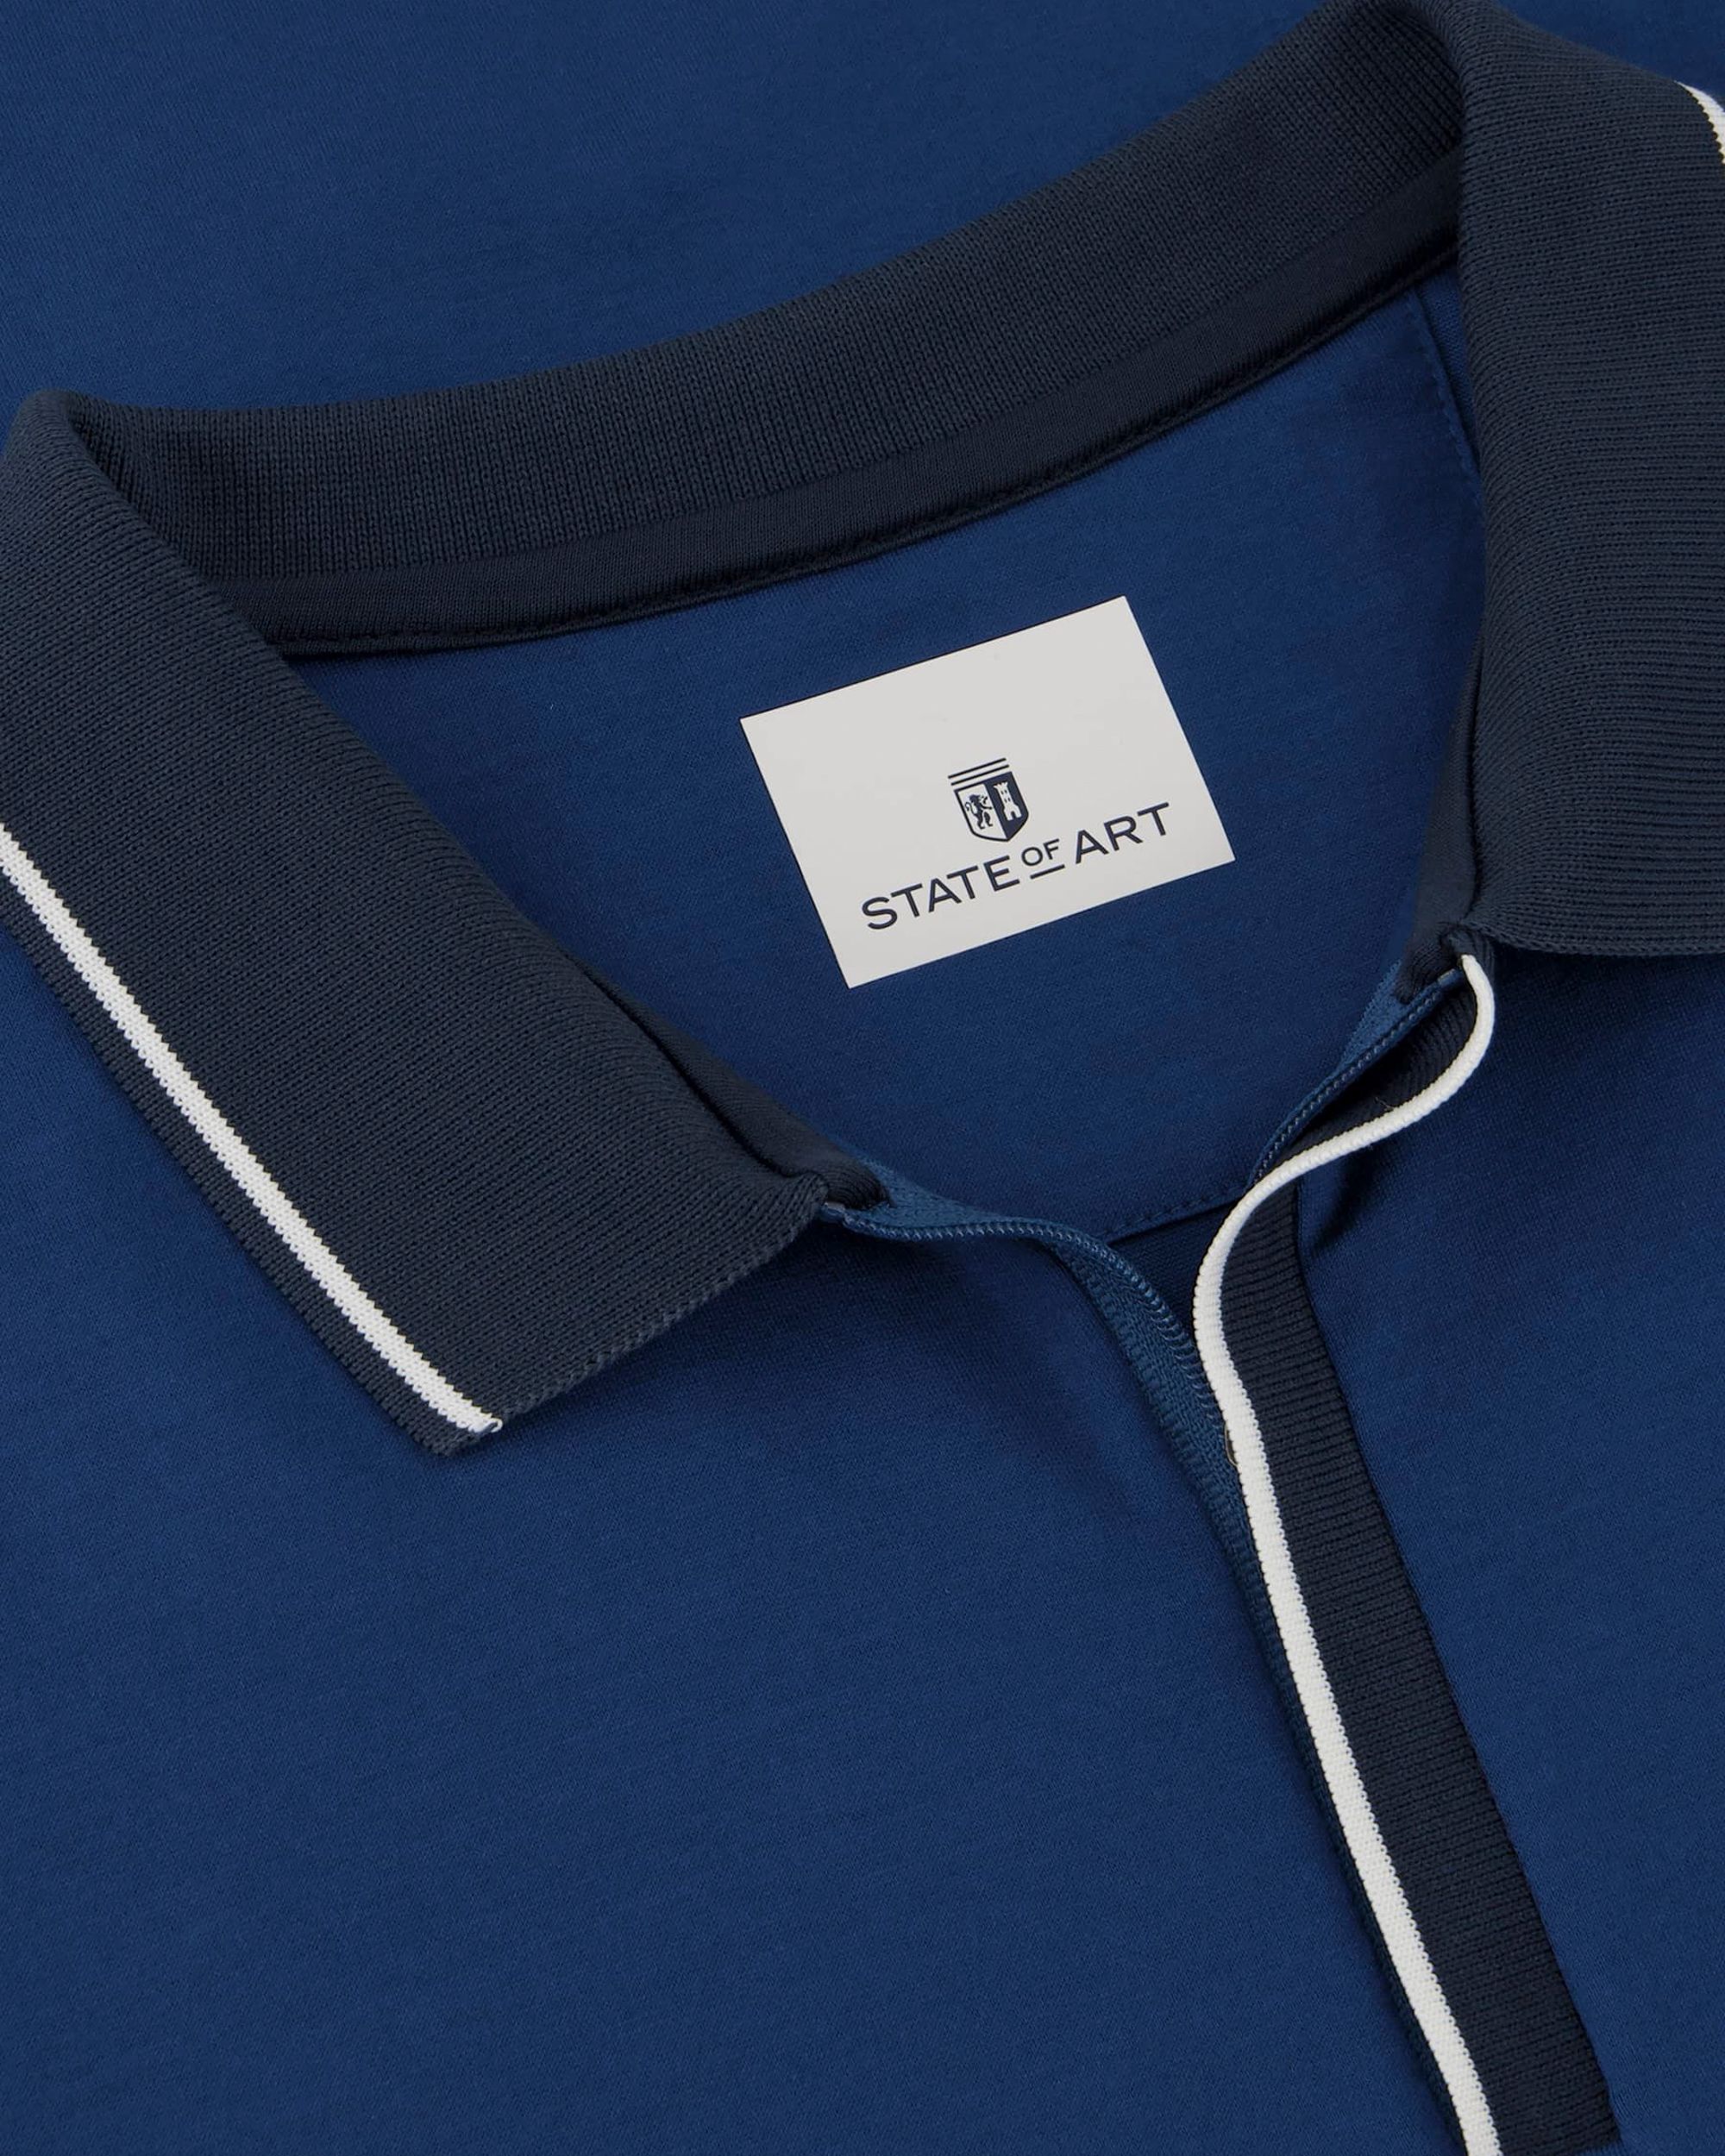 State of Art Polo KM Donker blauw 093414-001-4XL